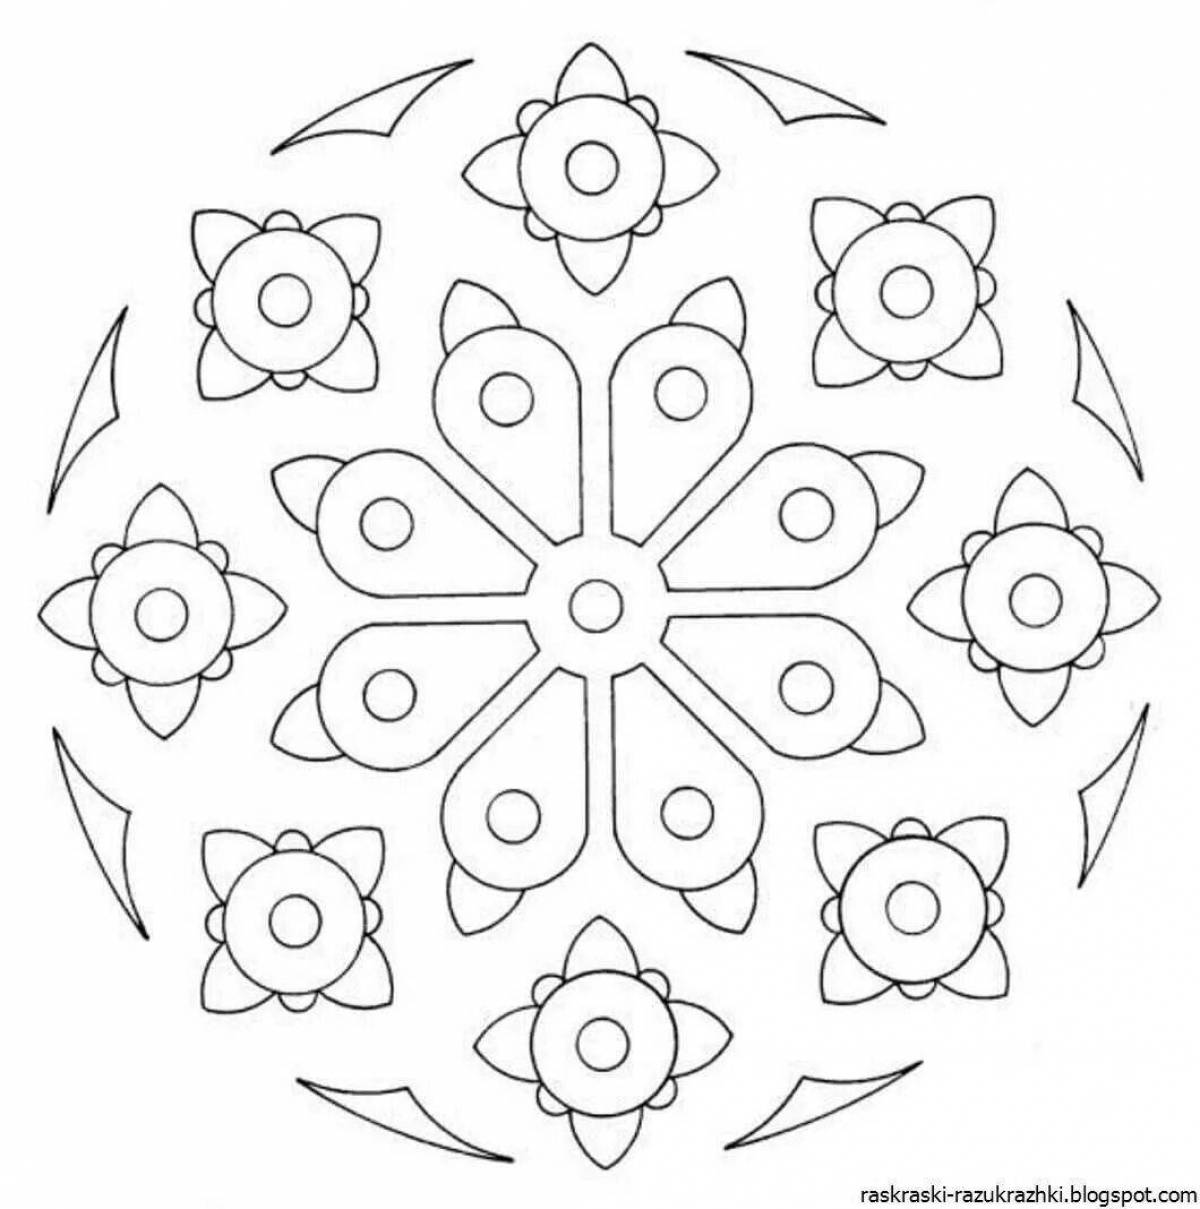 Amazing patterns and ornaments for coloring for children